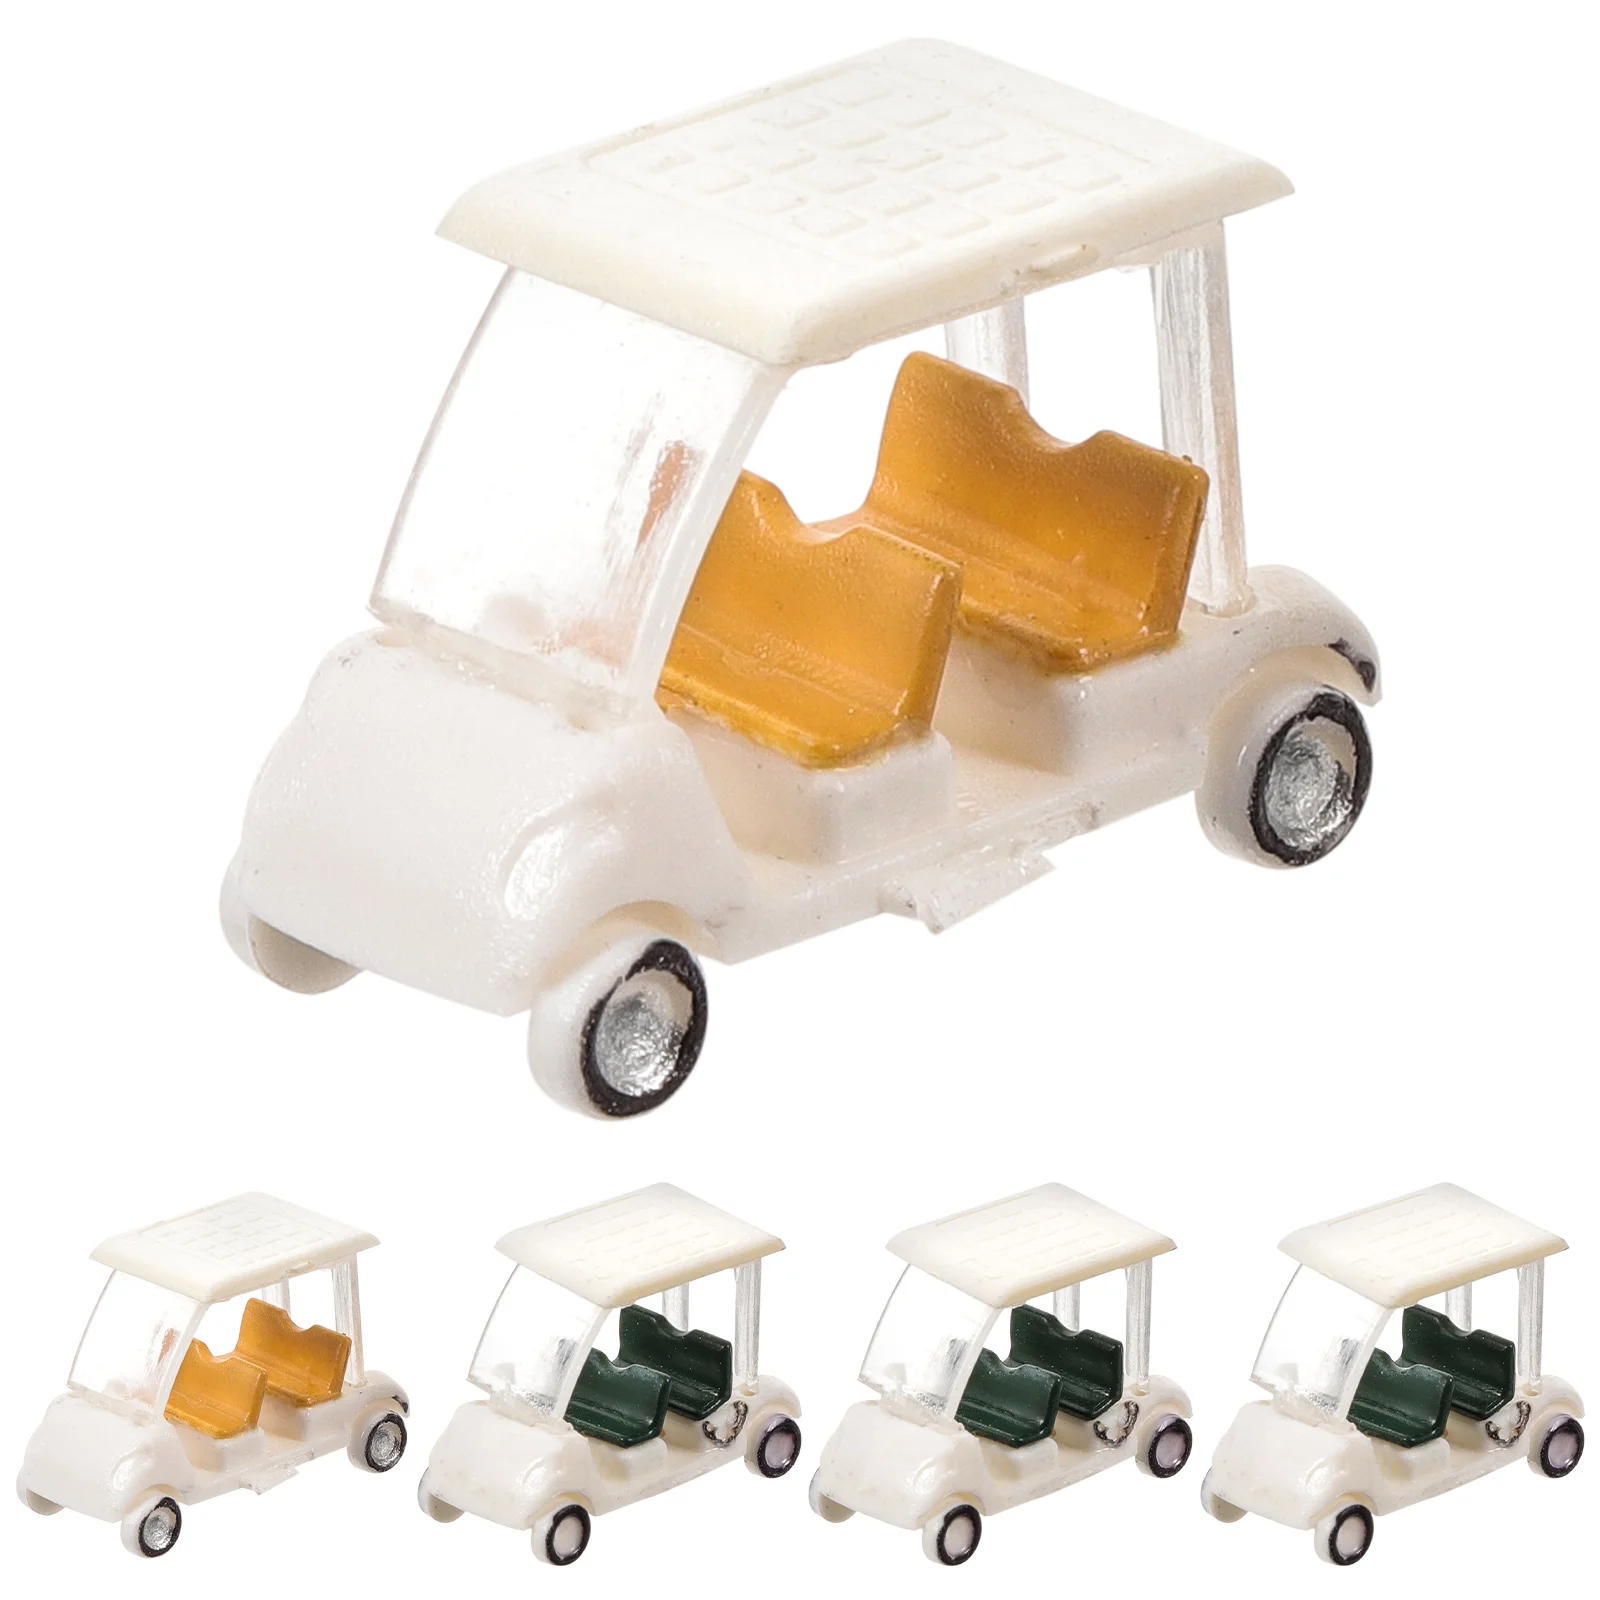 

5 Pcs Small Golf Cart Decor Miniature Toys Figurines Kid Outdoor Party Decorations Sand Table Golfs